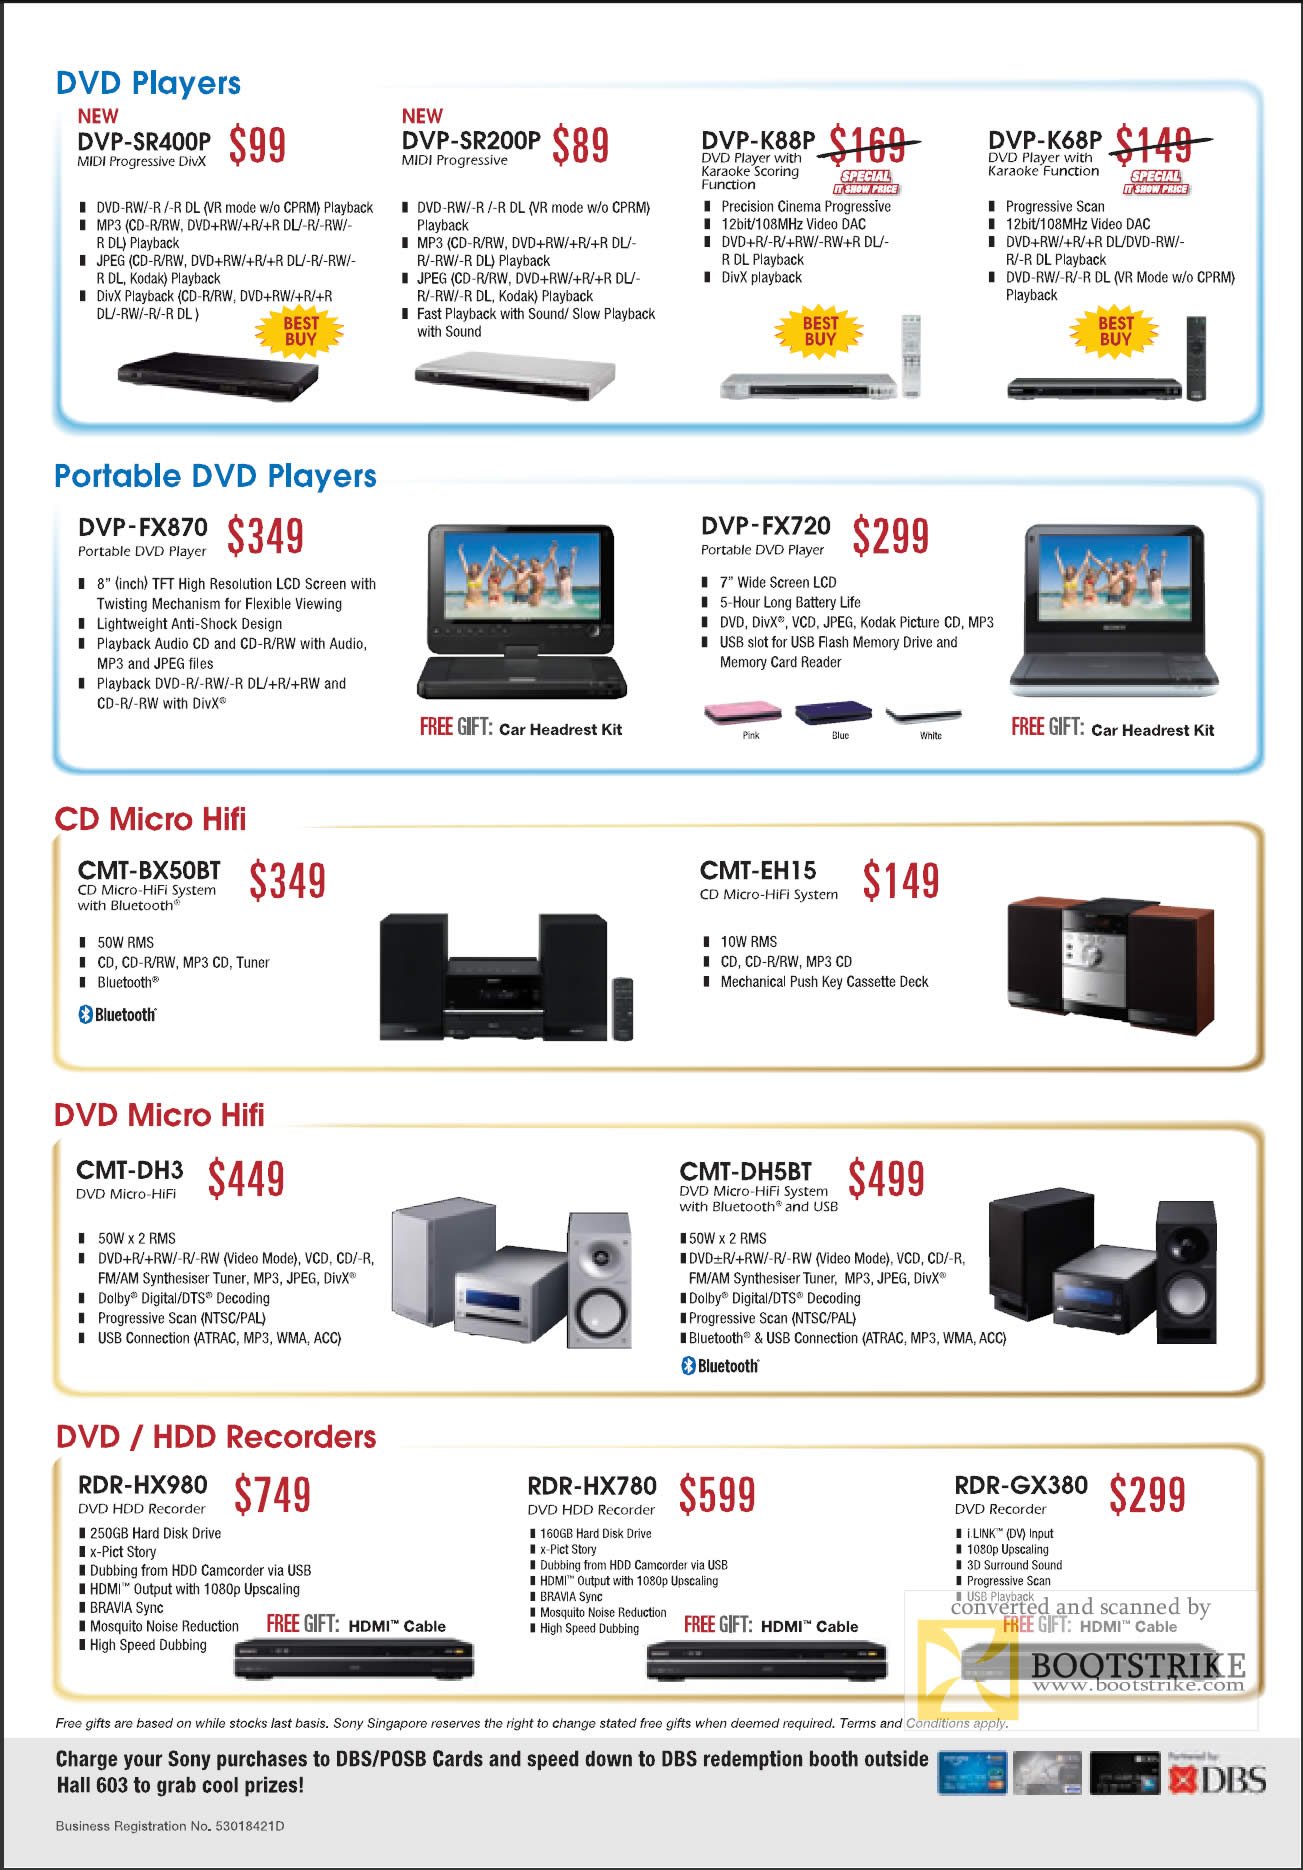 IT Show 2009 price list image brochure of Sony CD DVD Recorders Players